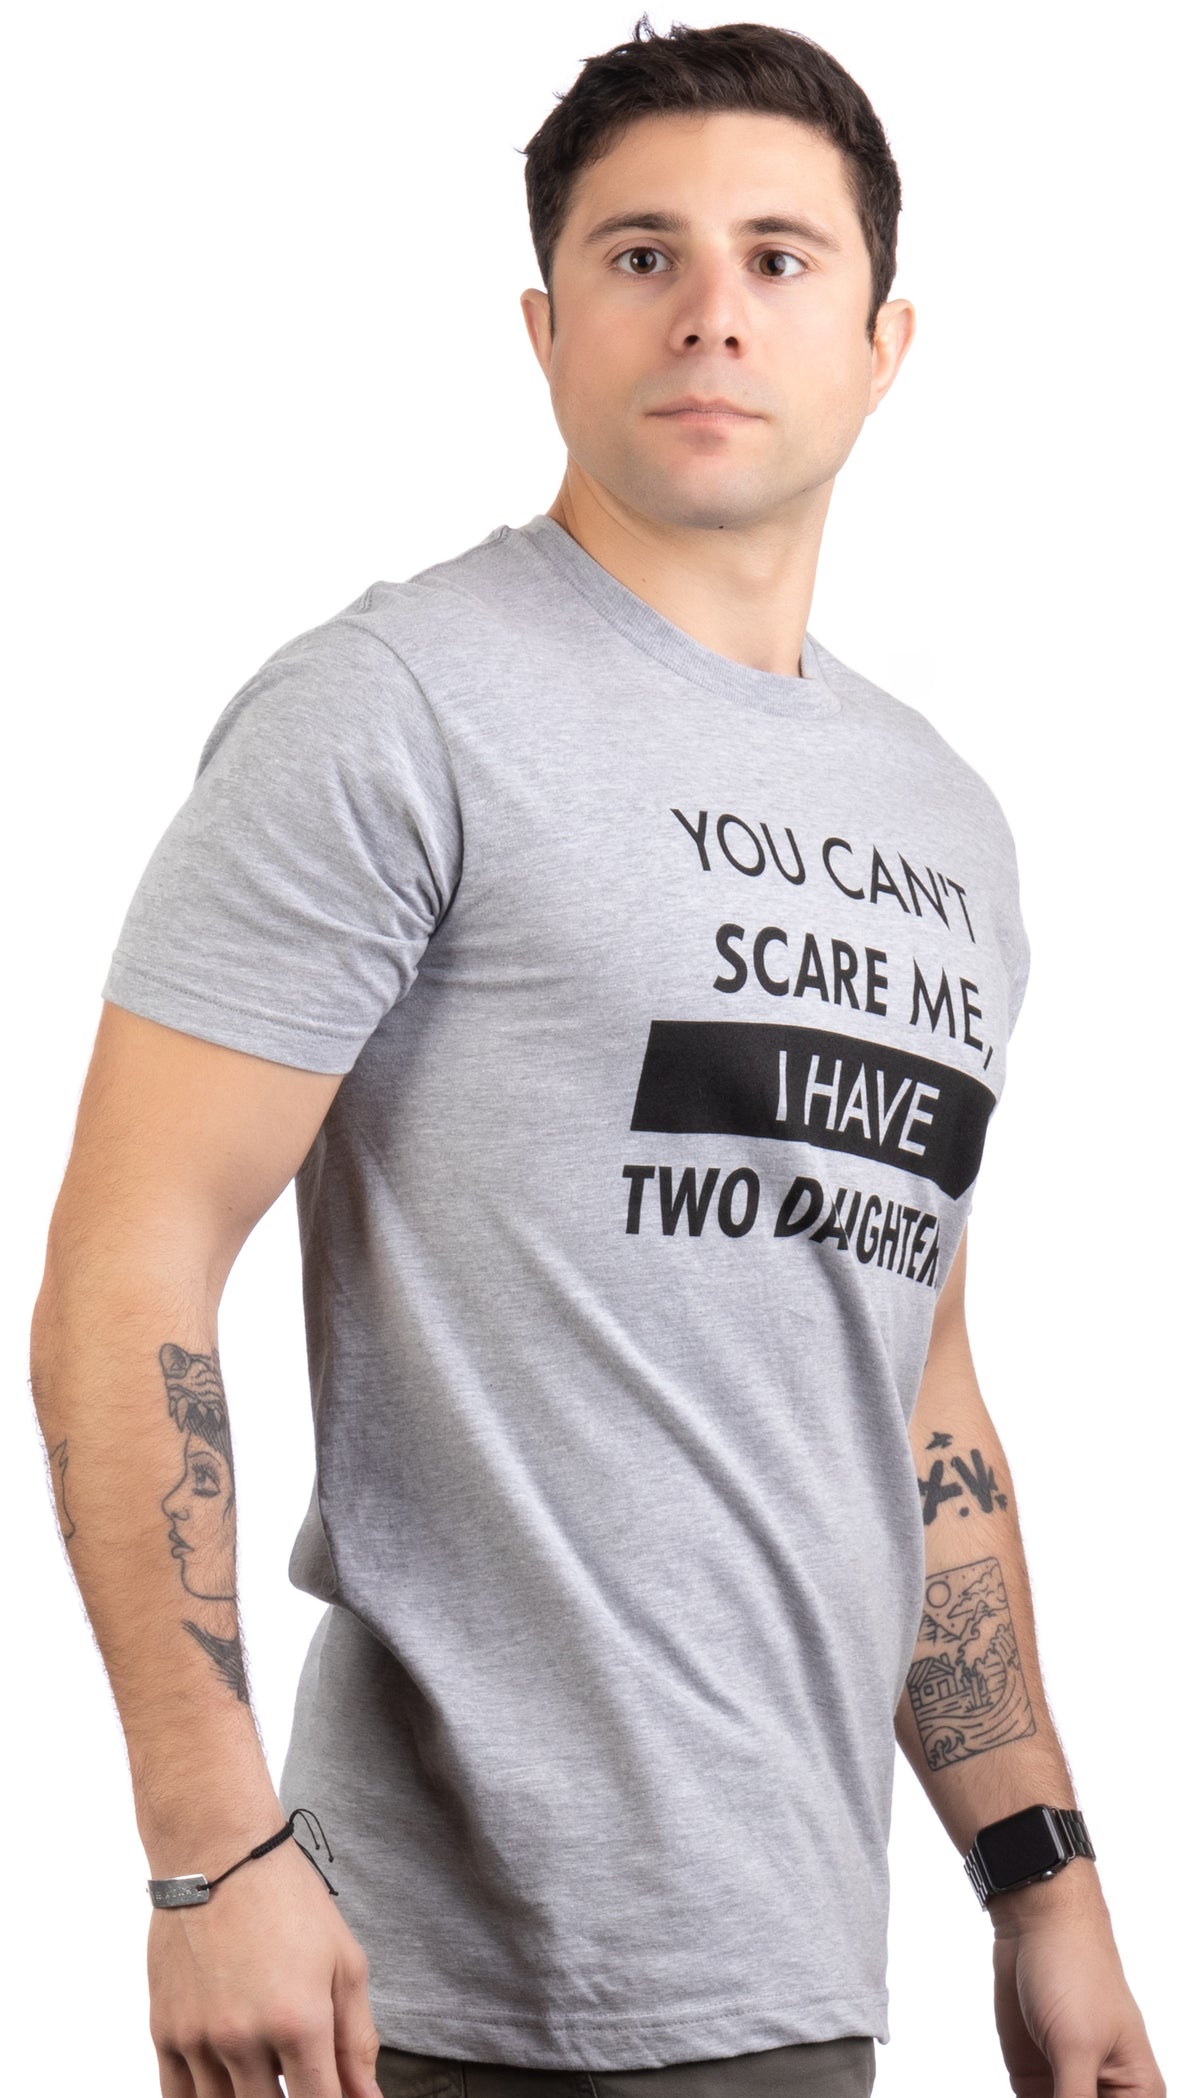 "You Can't Scare Me, I have Two Daughters" - Funny Dad Joke, Father T-shirt - Men's/Unisex